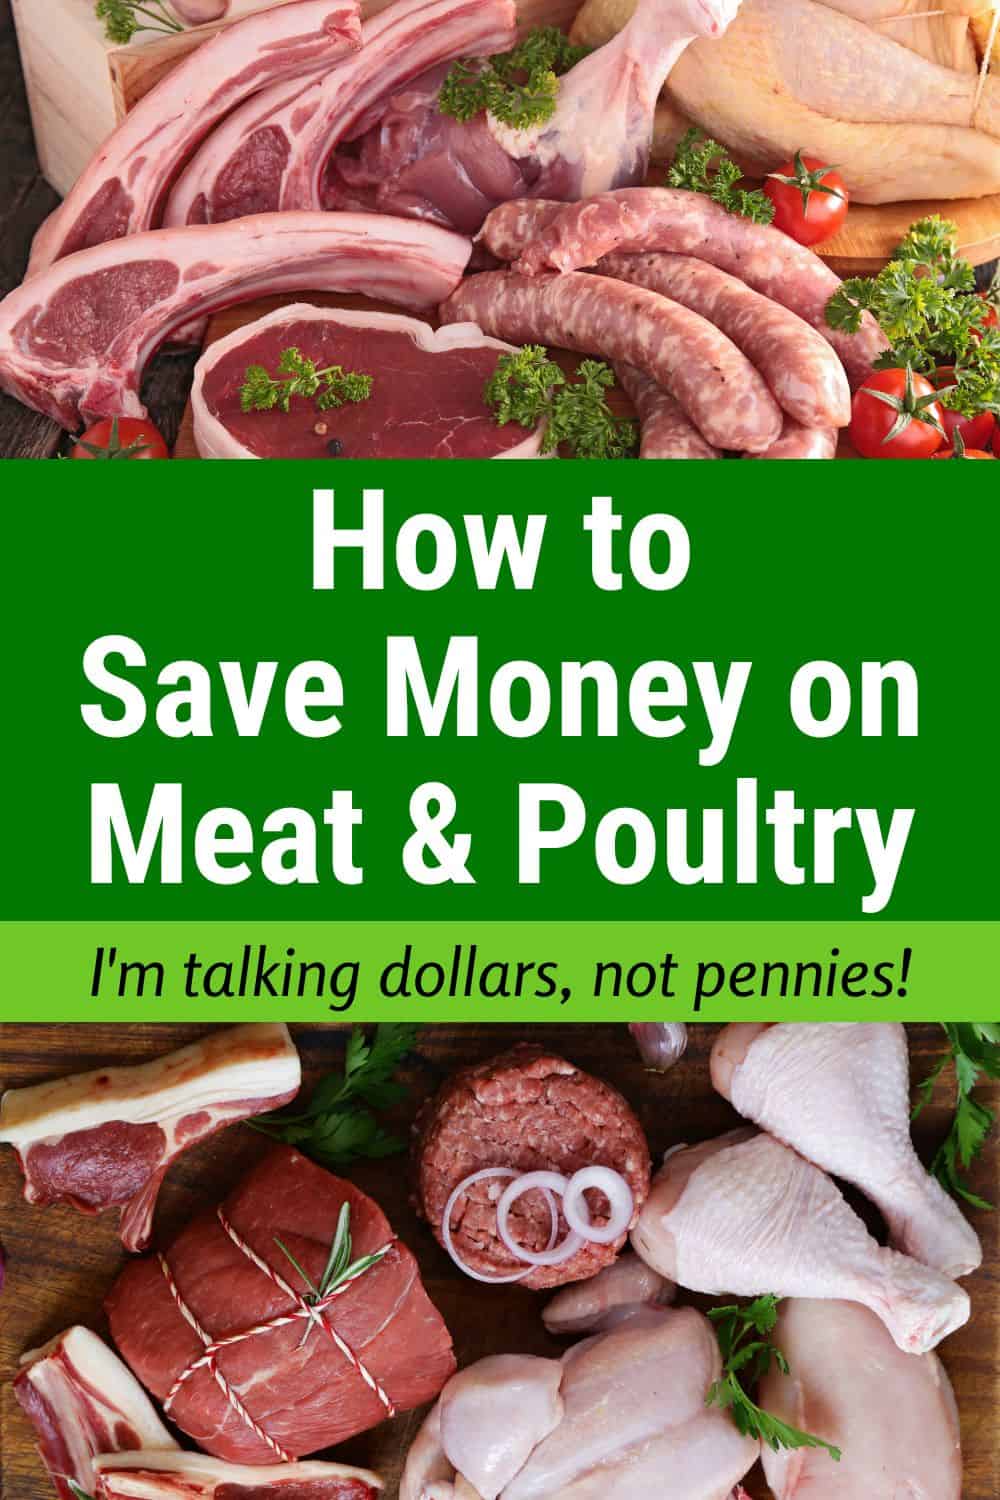 How to Save Money on Meat